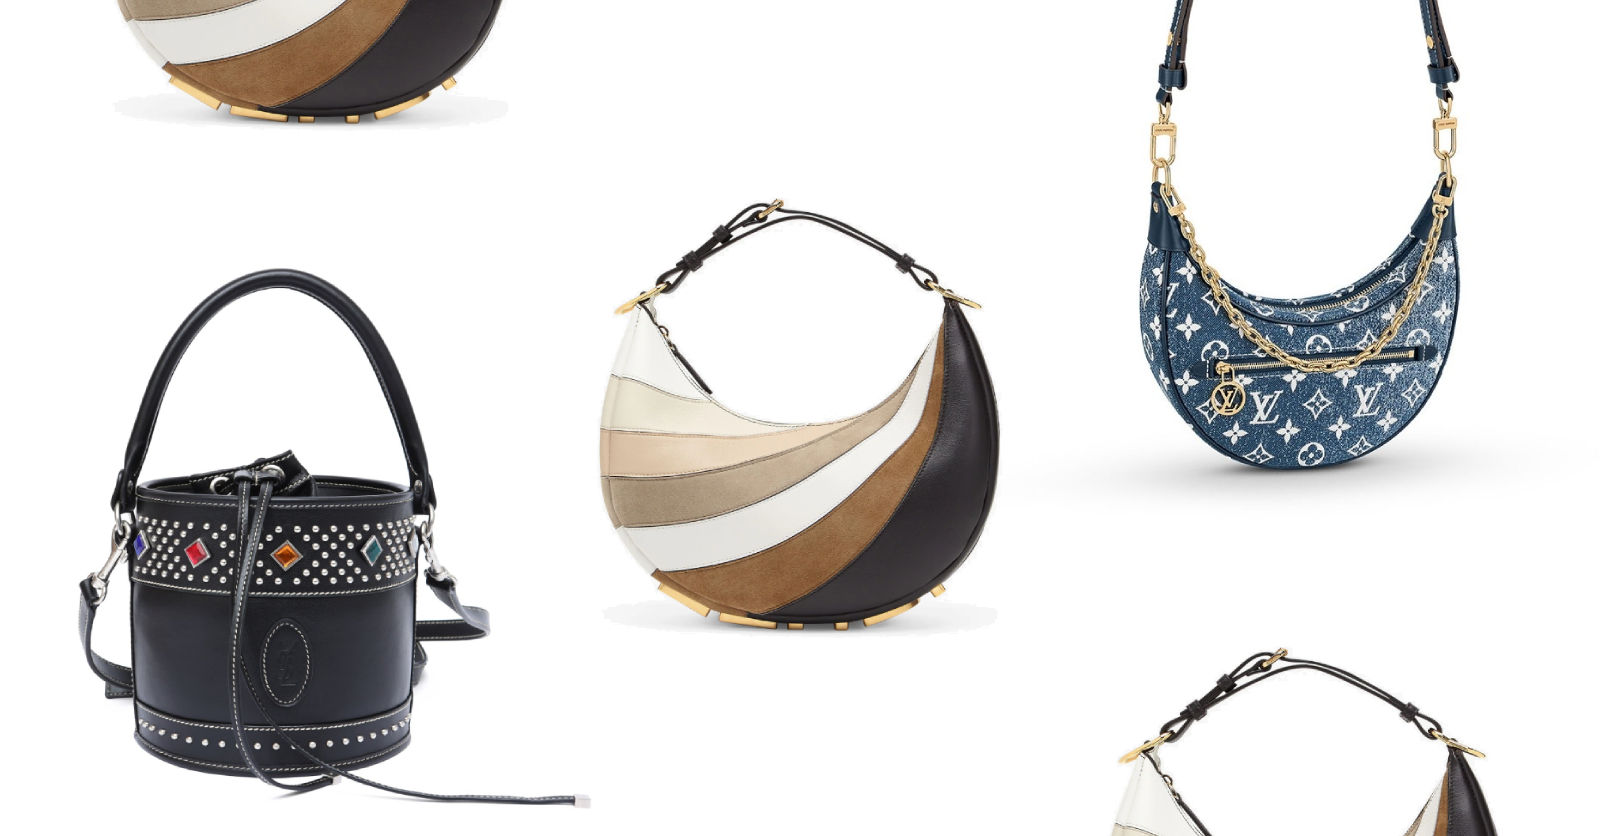 Fendi debuts the Fendigraphy handbag, and more new luxury bags to love